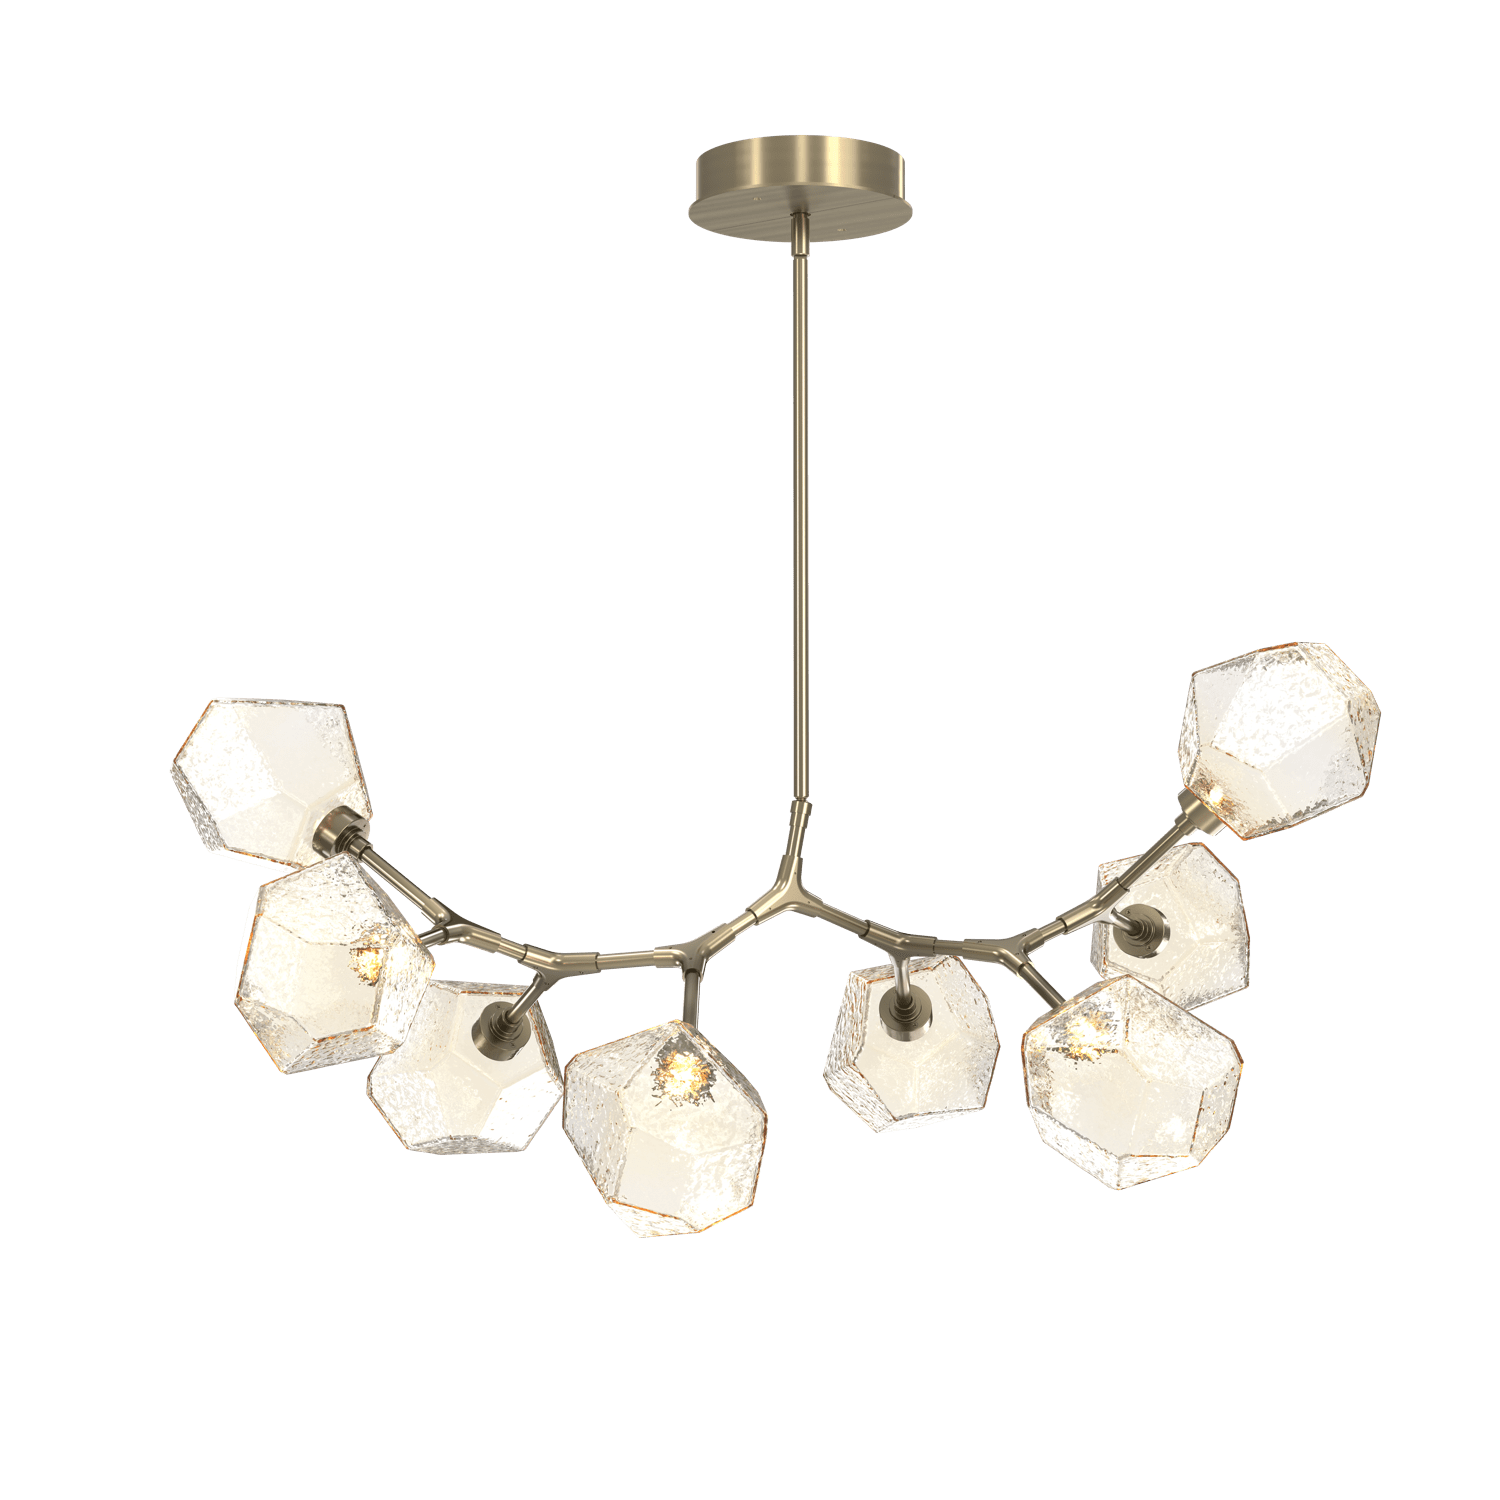 PLB0039-BB-HB-A-Hammerton-Studio-Gem-8-light-modern-branch-chandelier-with-heritage-brass-finish-and-amber-blown-glass-shades-and-LED-lamping